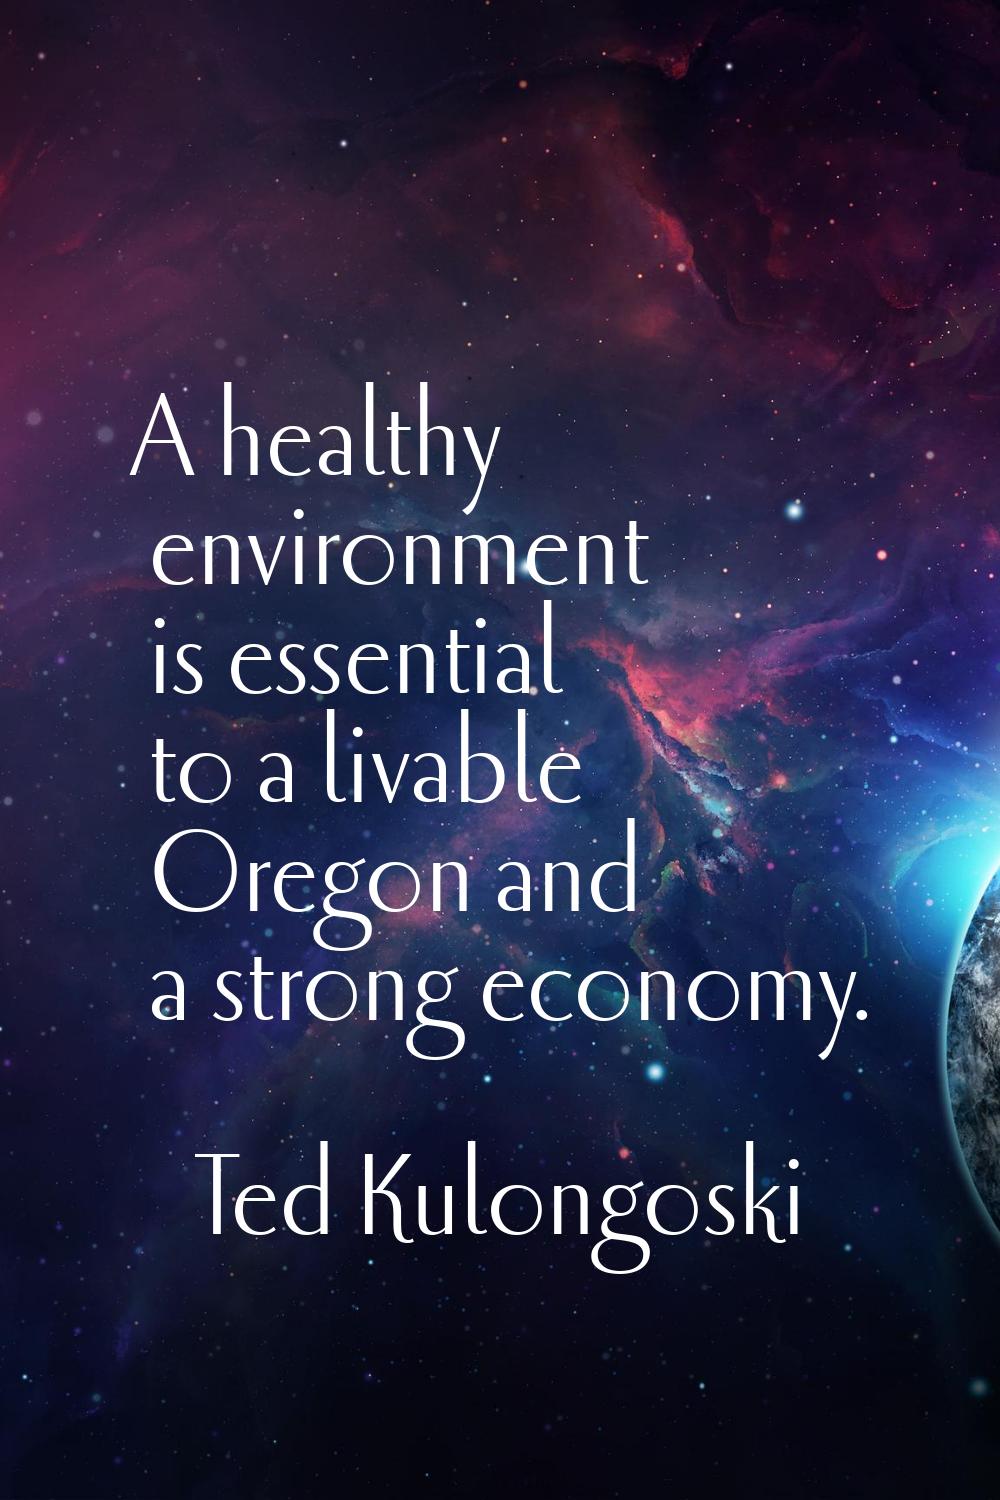 A healthy environment is essential to a livable Oregon and a strong economy.